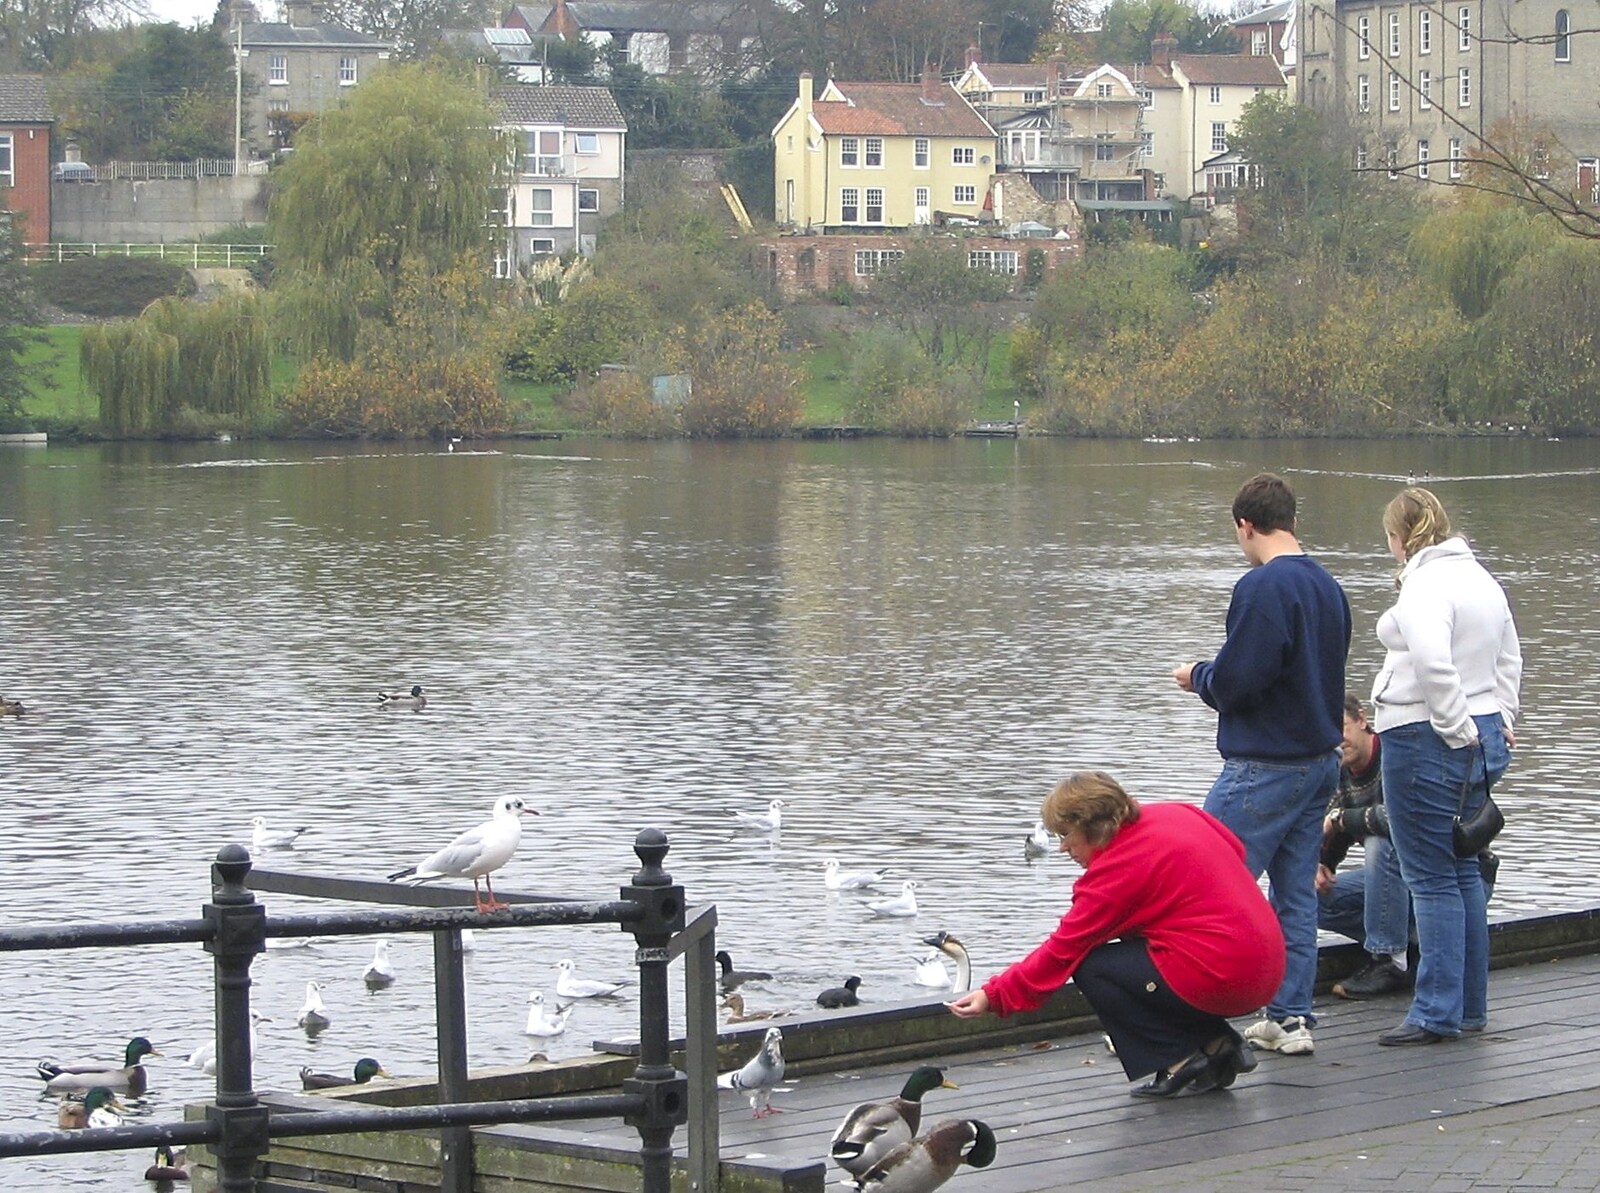 Someone feeds a pigeon on the fishing pontoon from Feeding the Ducks: a Diss and Norwich Miscellany - 7th November 2004